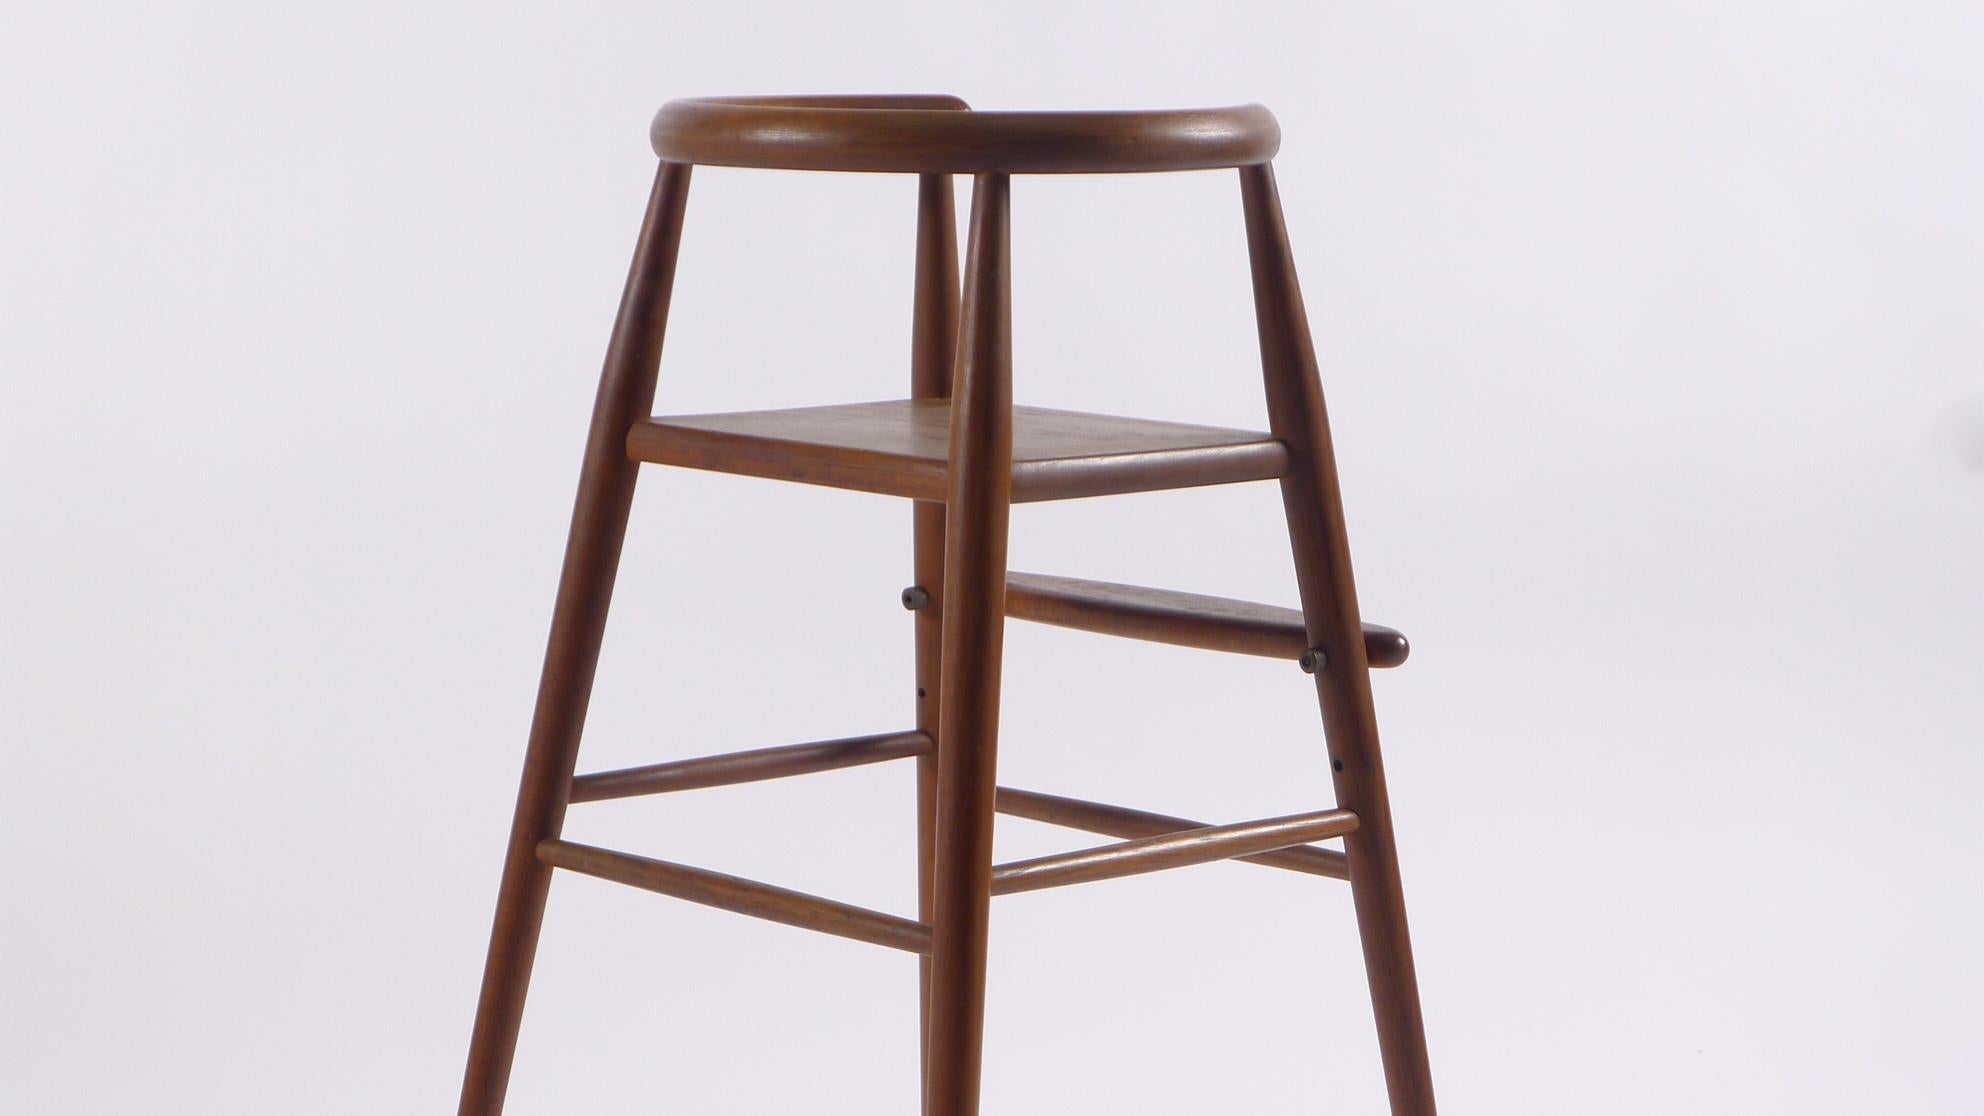 Nanna Ditzel Teak High Chair Stool, Danish 1960s with Label For Sale 1